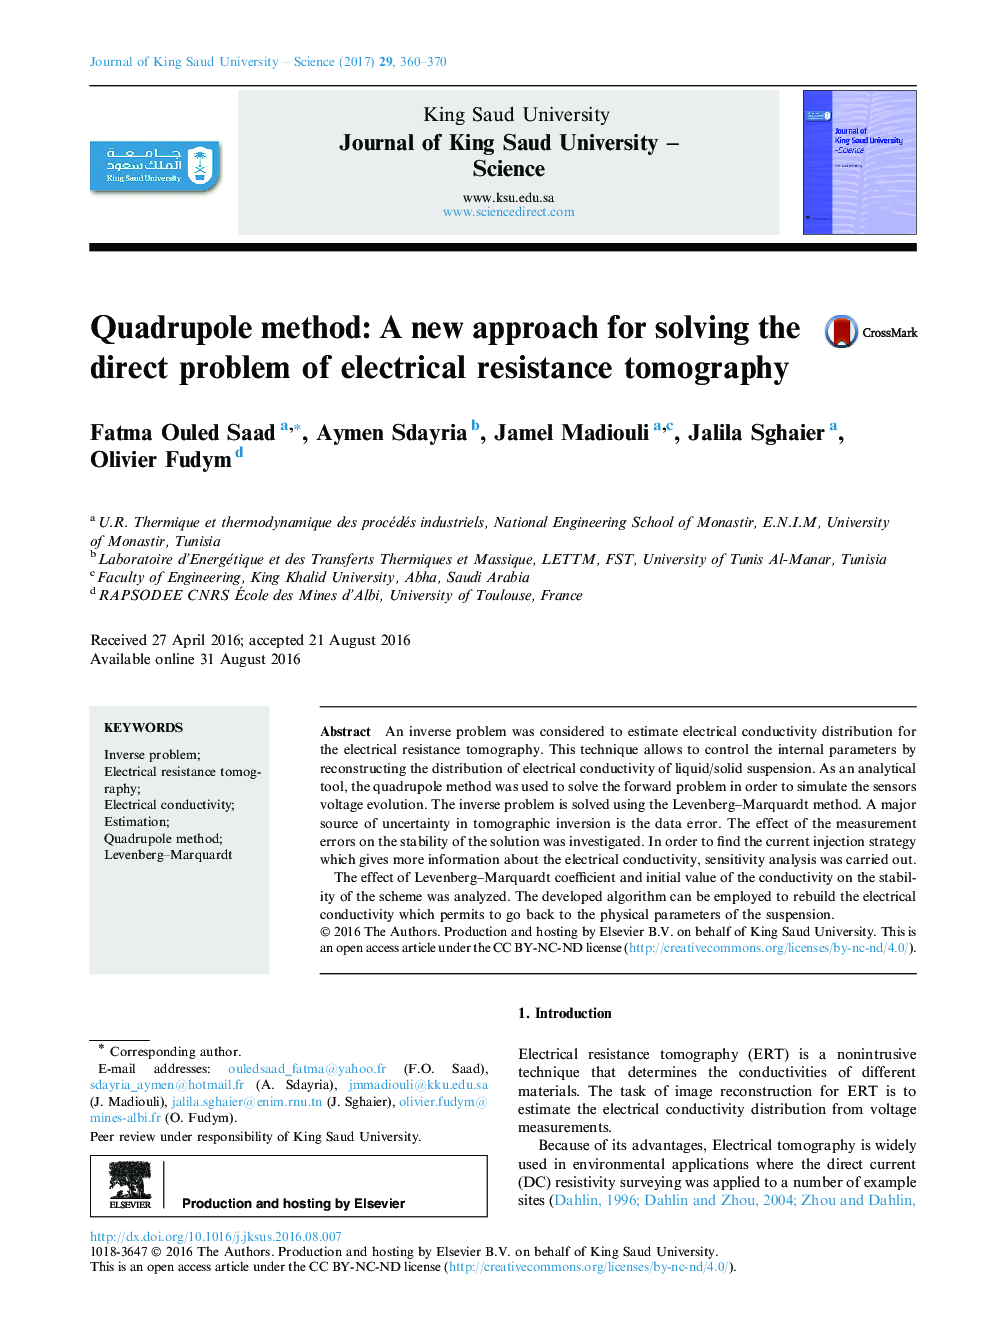 Quadrupole method: A new approach for solving the direct problem of electrical resistance tomography